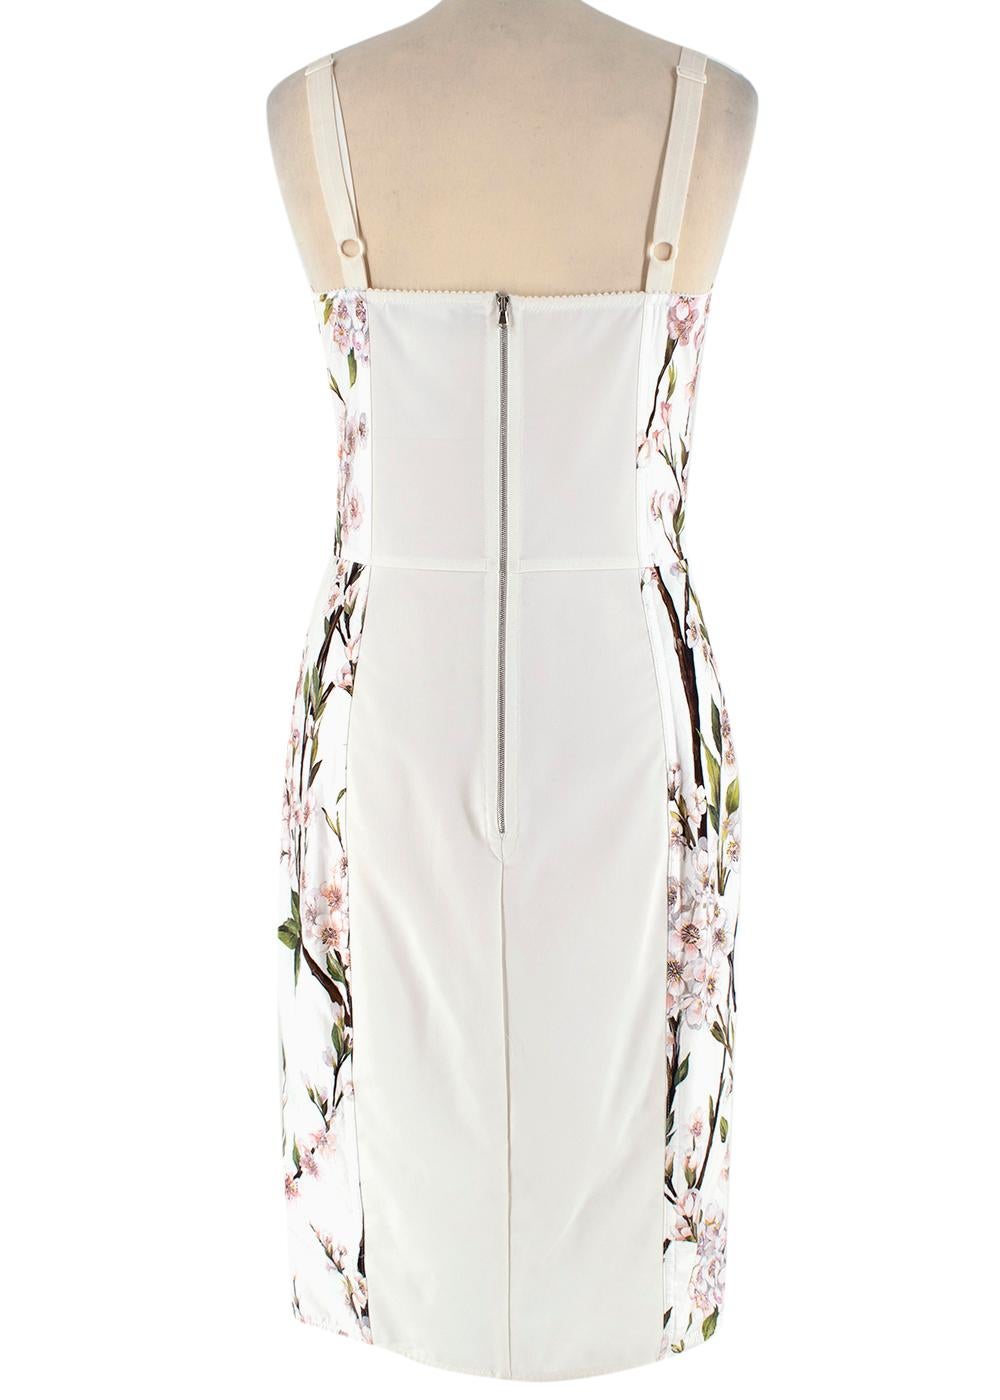 Dolce and Gabbana White Floral Bustier Dress - Size US 4 For Sale 2